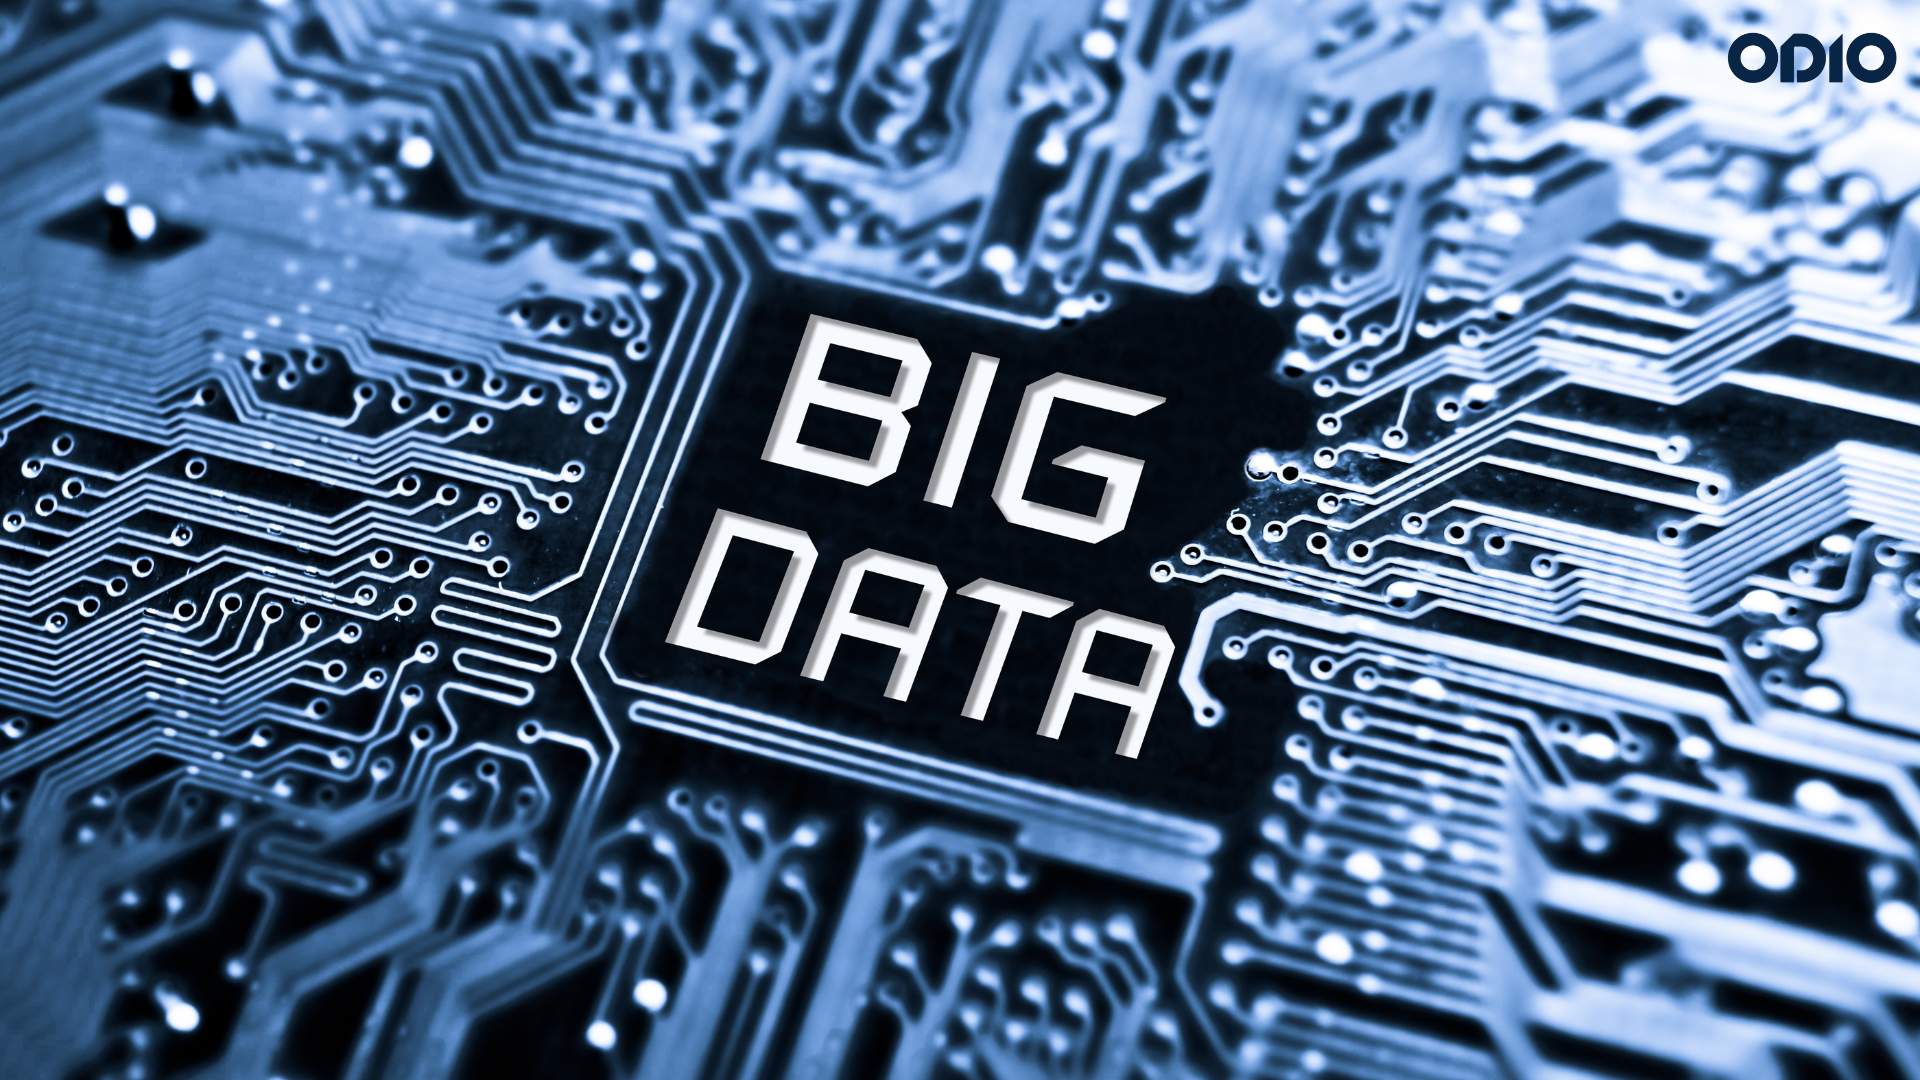 Image showing Big Data written to show the importance of Big Data in Contact Centers